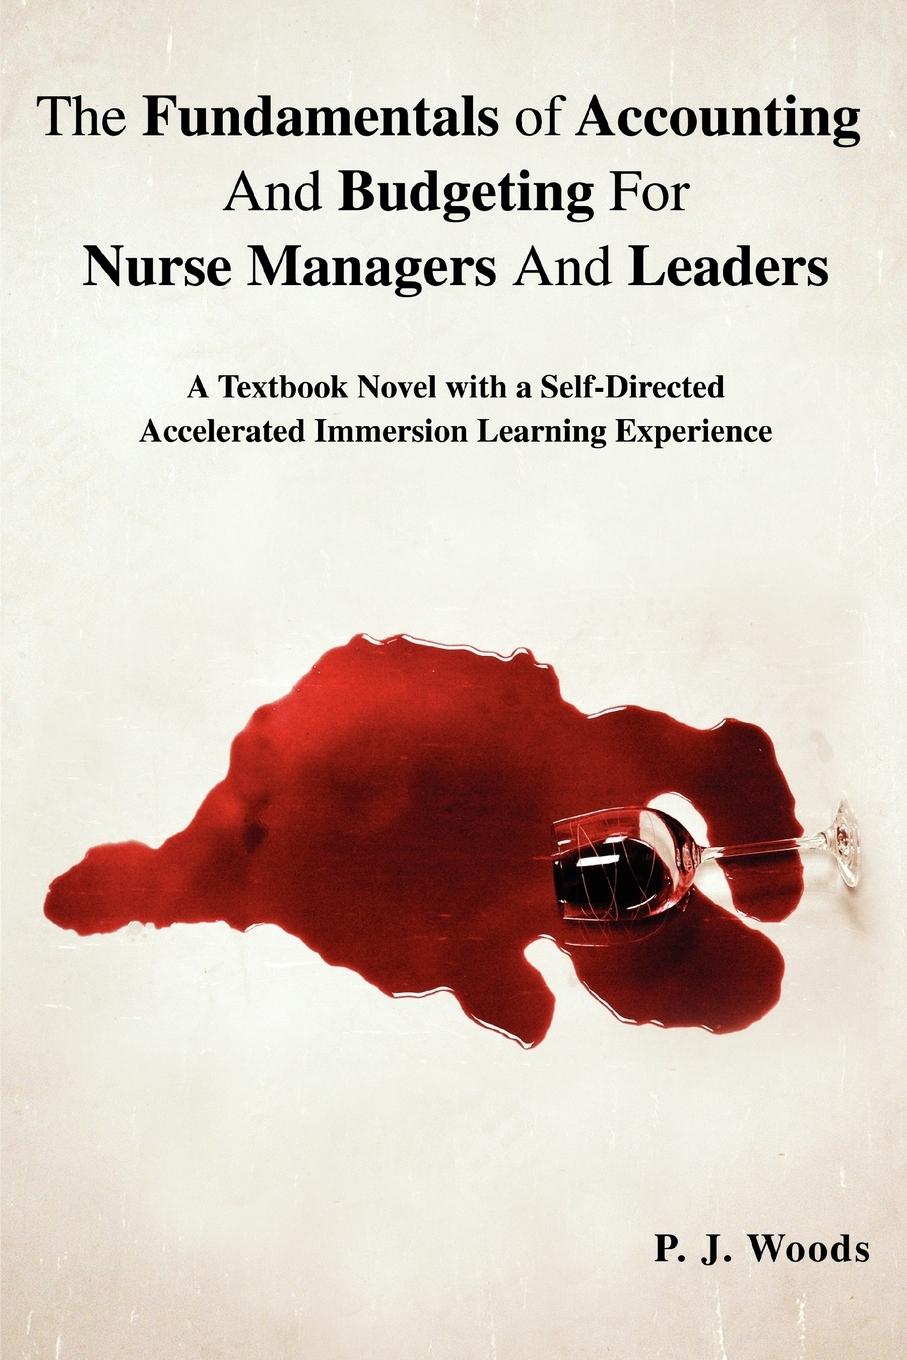 The Fundamentals of Accounting And Budgeting For Nurse Managers And Leaders - Woods, P. J.